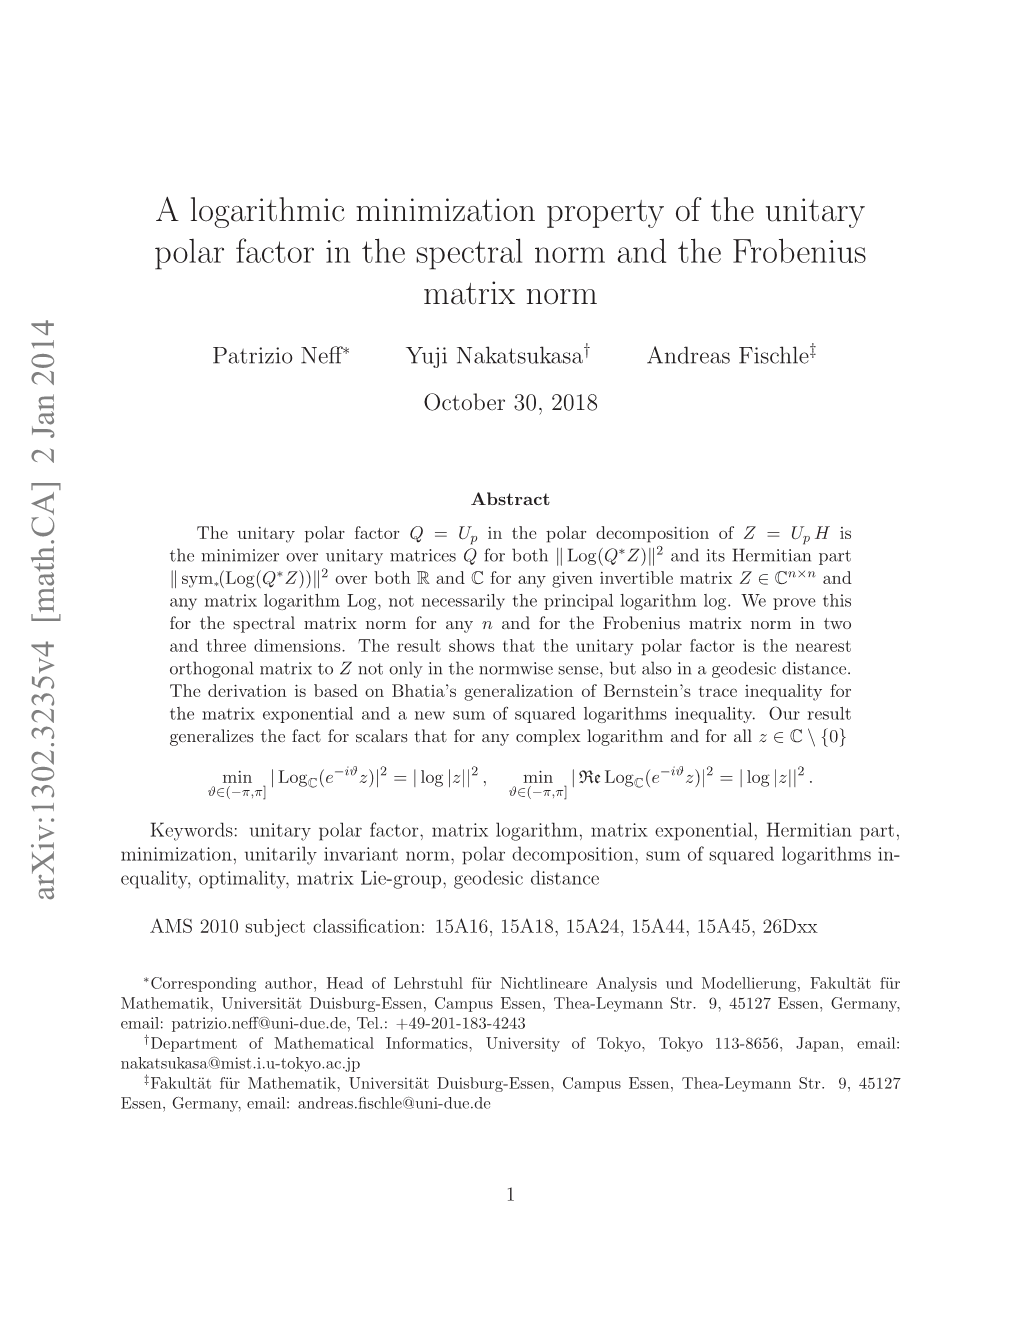 A Logarithmic Minimization Property of the Unitary Polar Factor in The